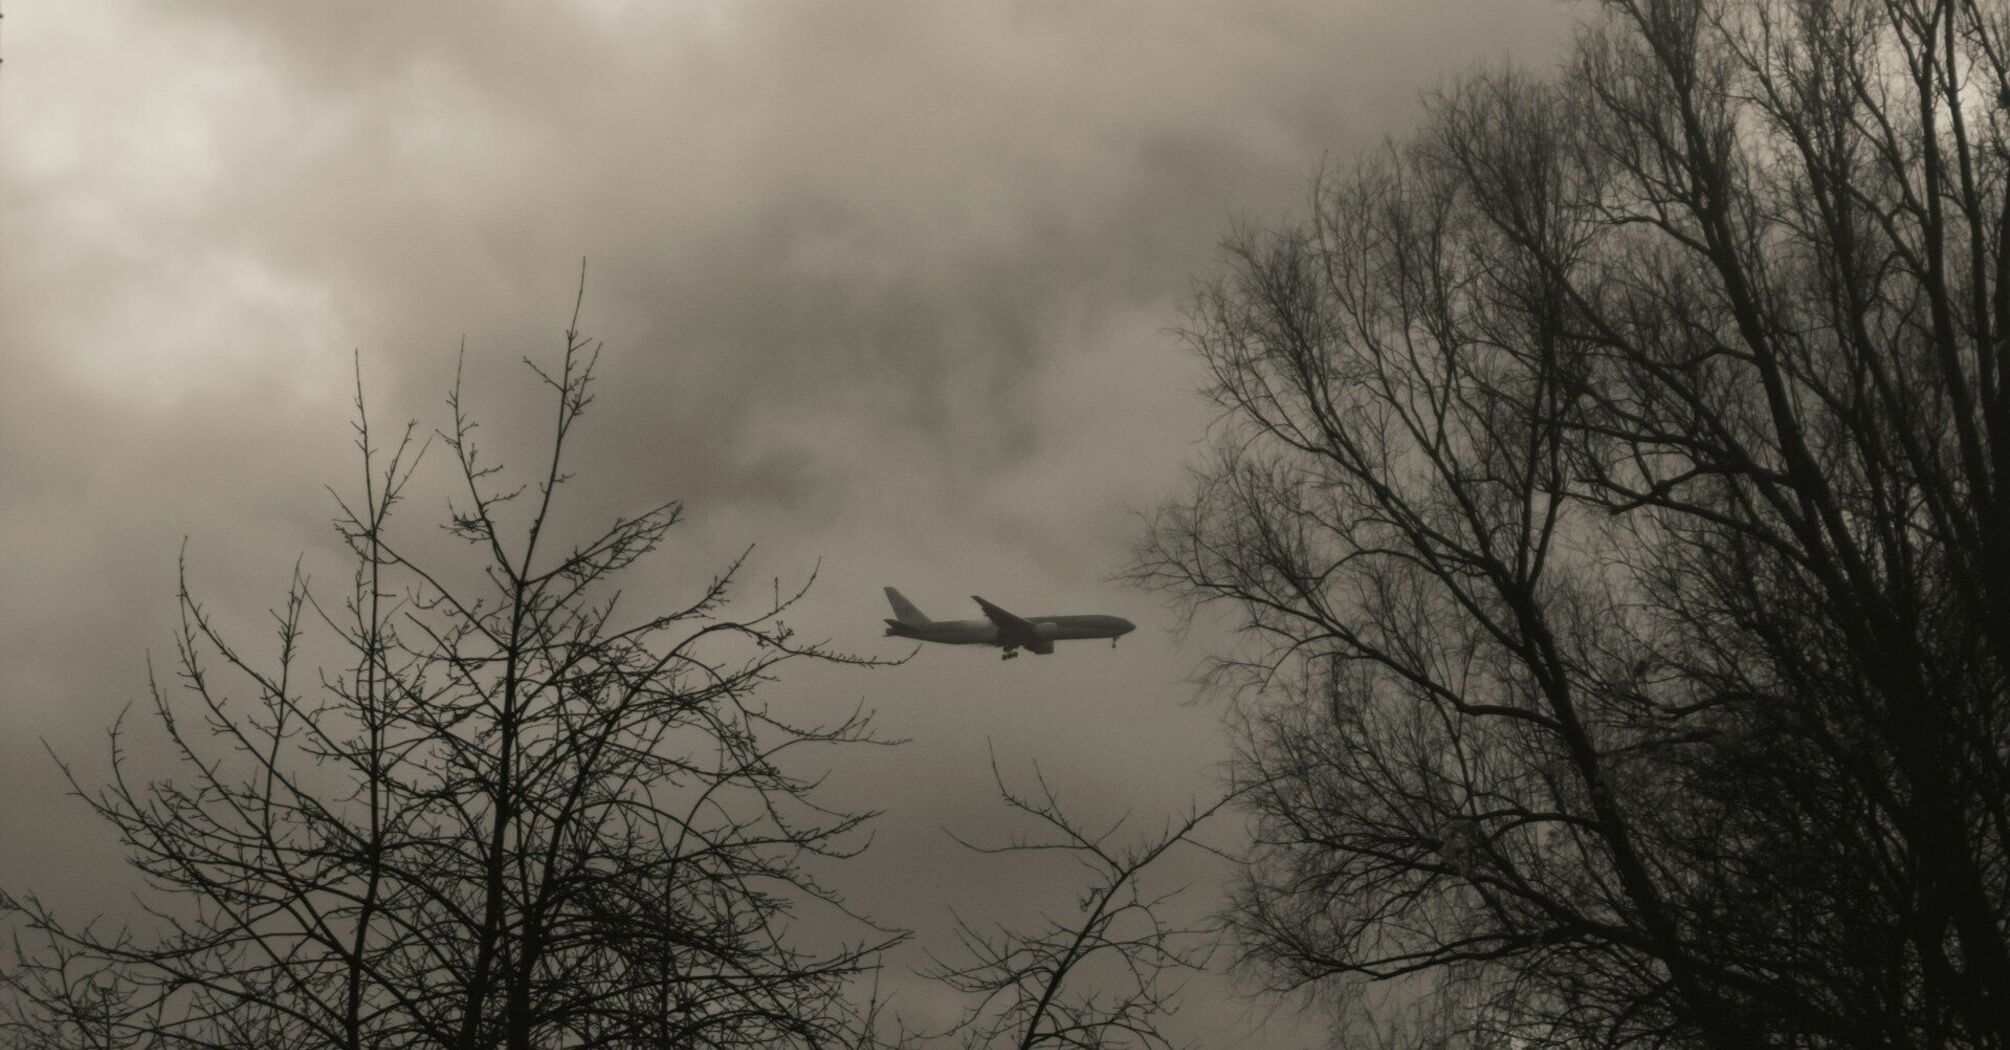 A silhouette of an airplane flying amidst overcast skies, with bare trees in the foreground